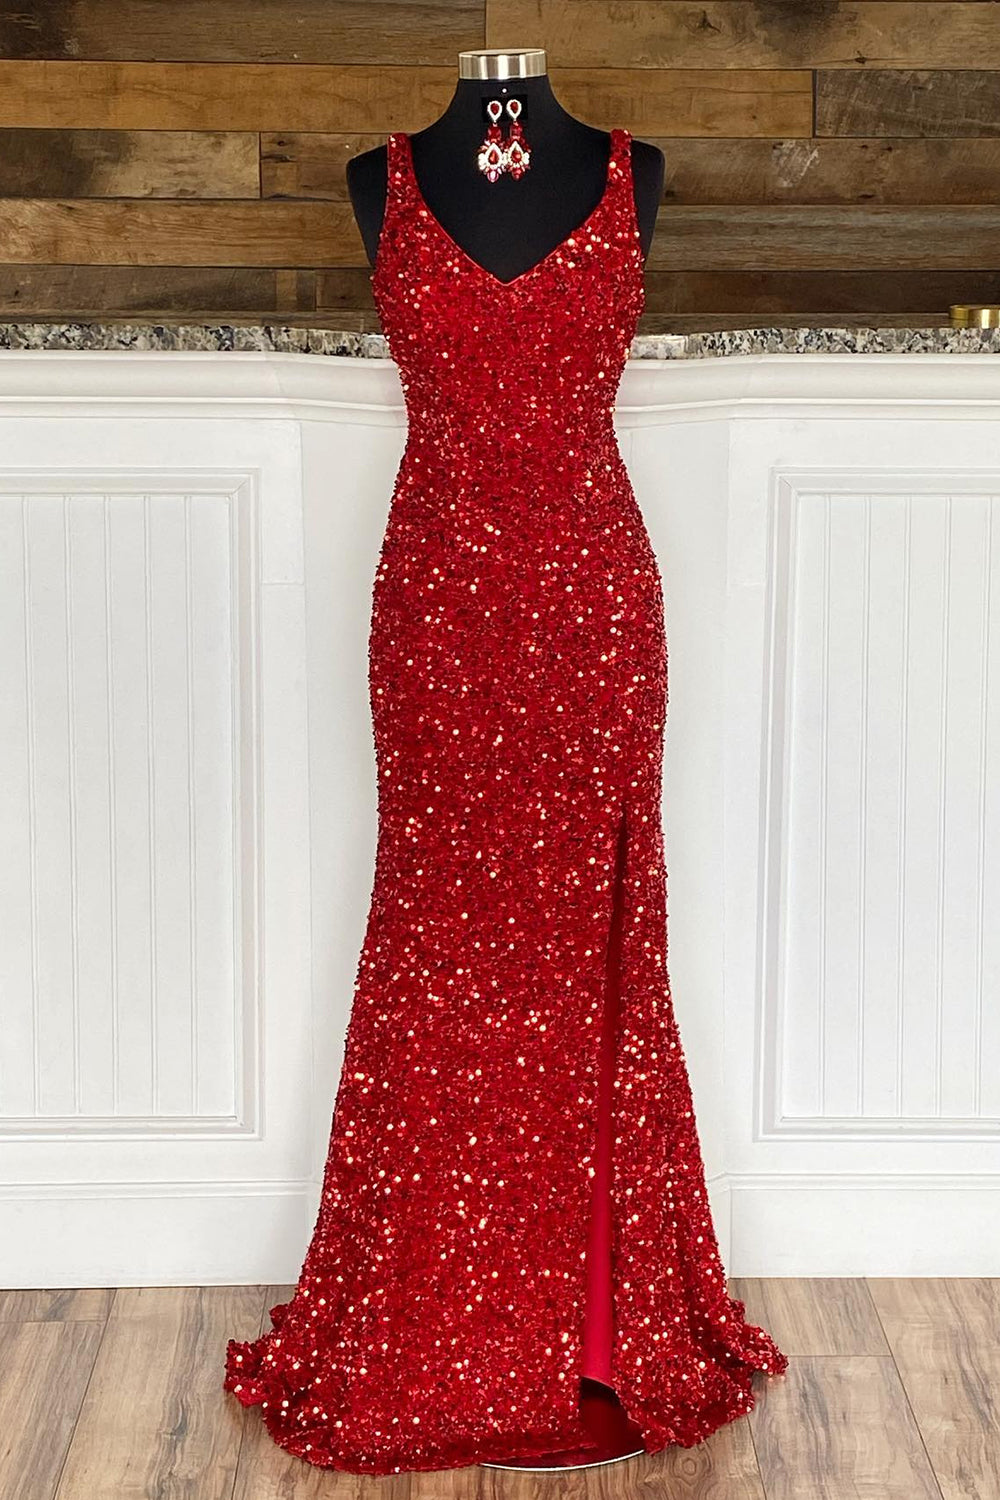 Sheath Spaghetti Straps Red Sequins Corset Prom Dress with Split Front Gowns, Fashion Dress